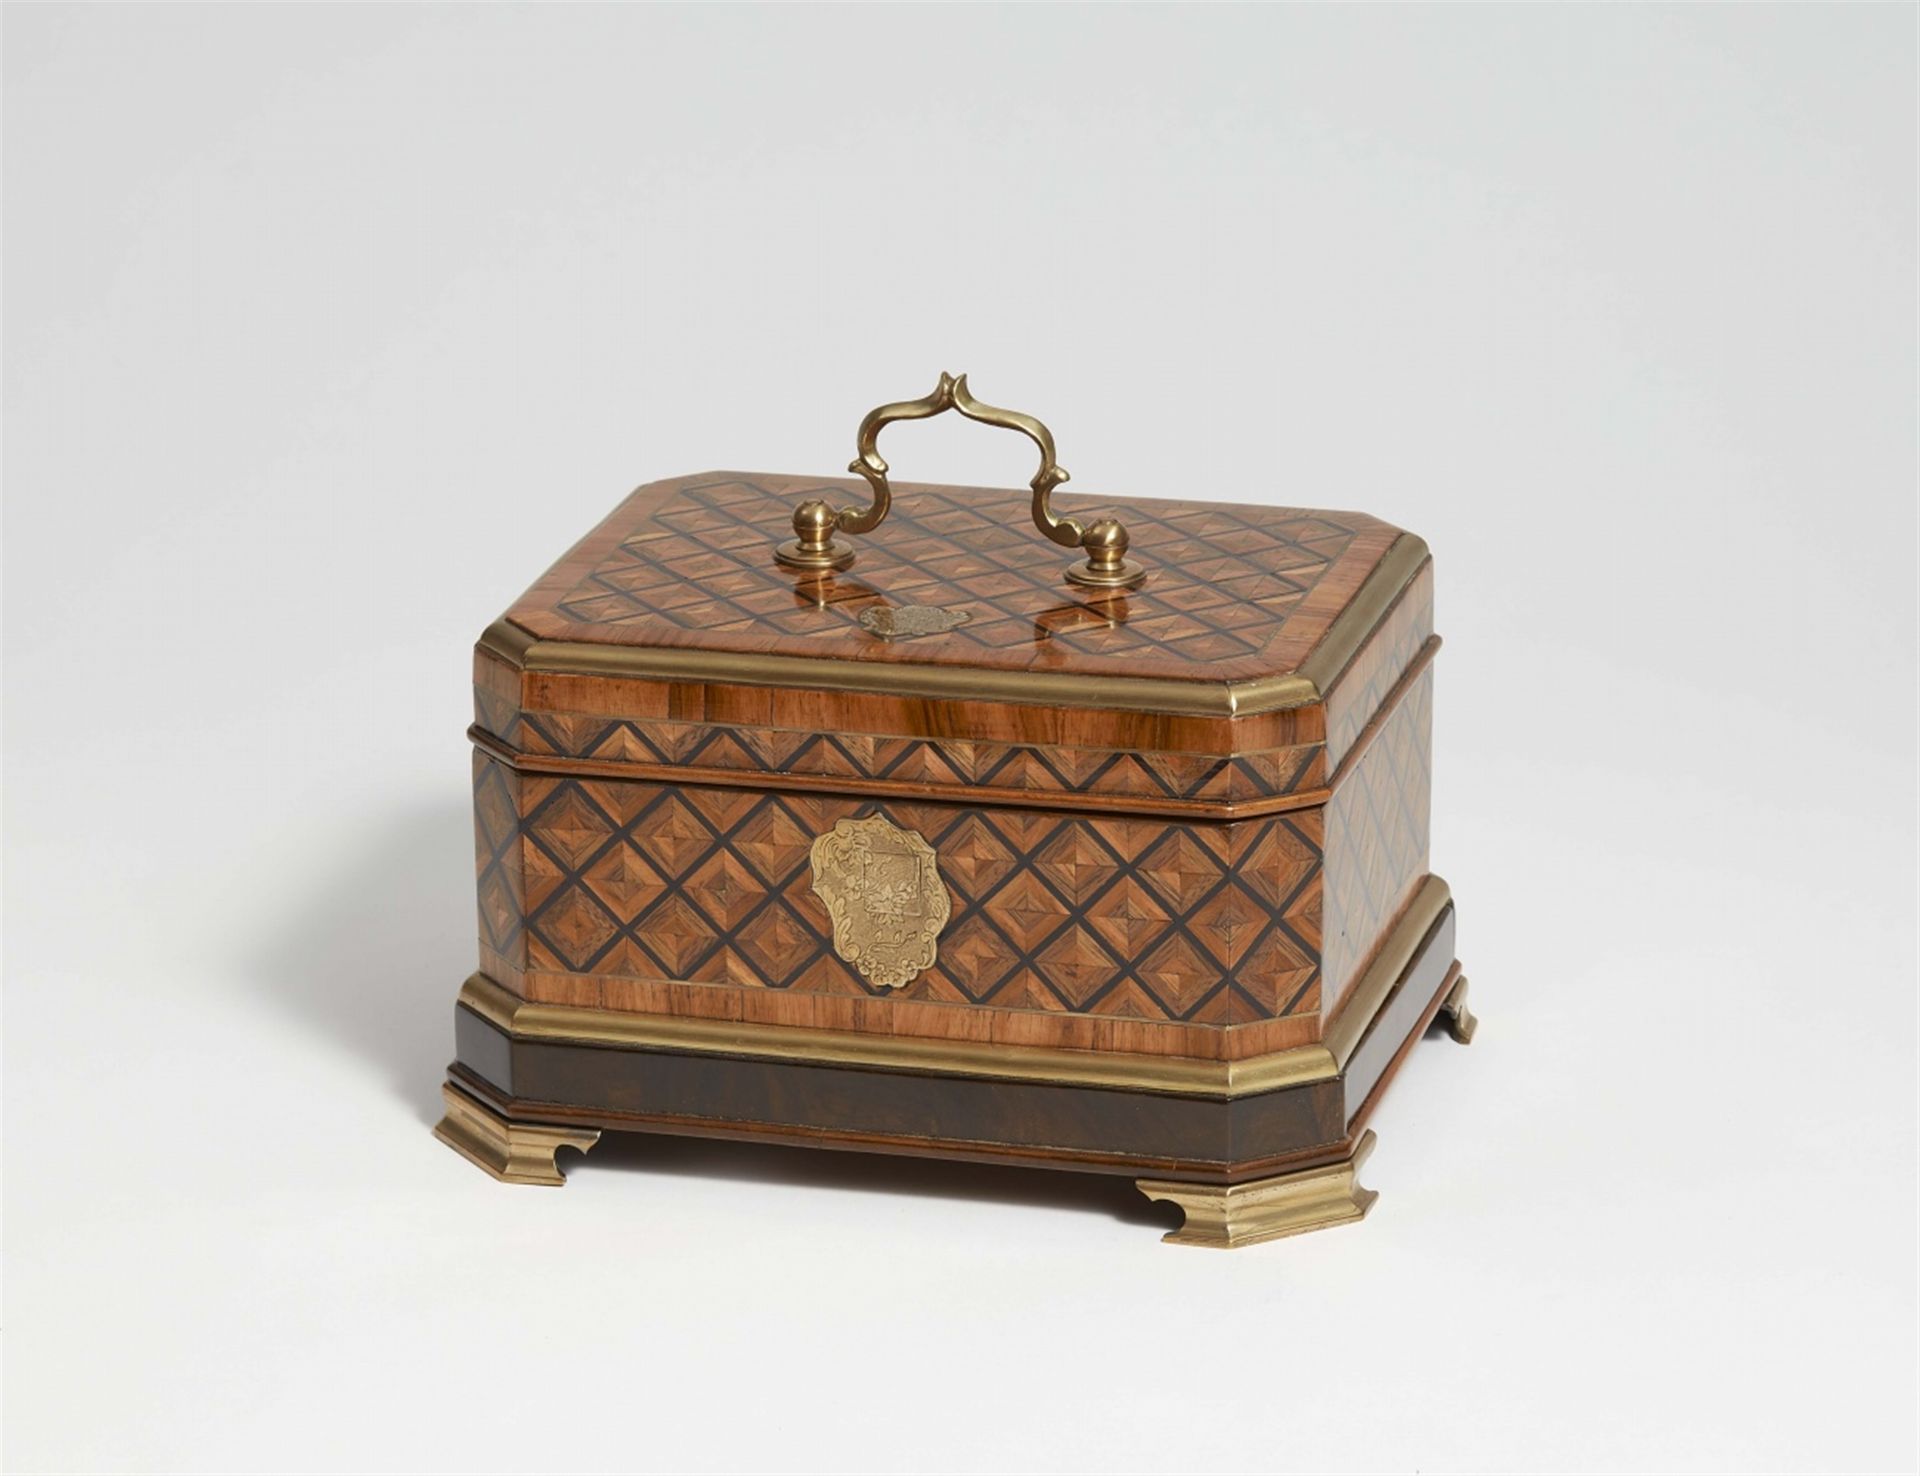 A marquetry box by Abraham Roentgen